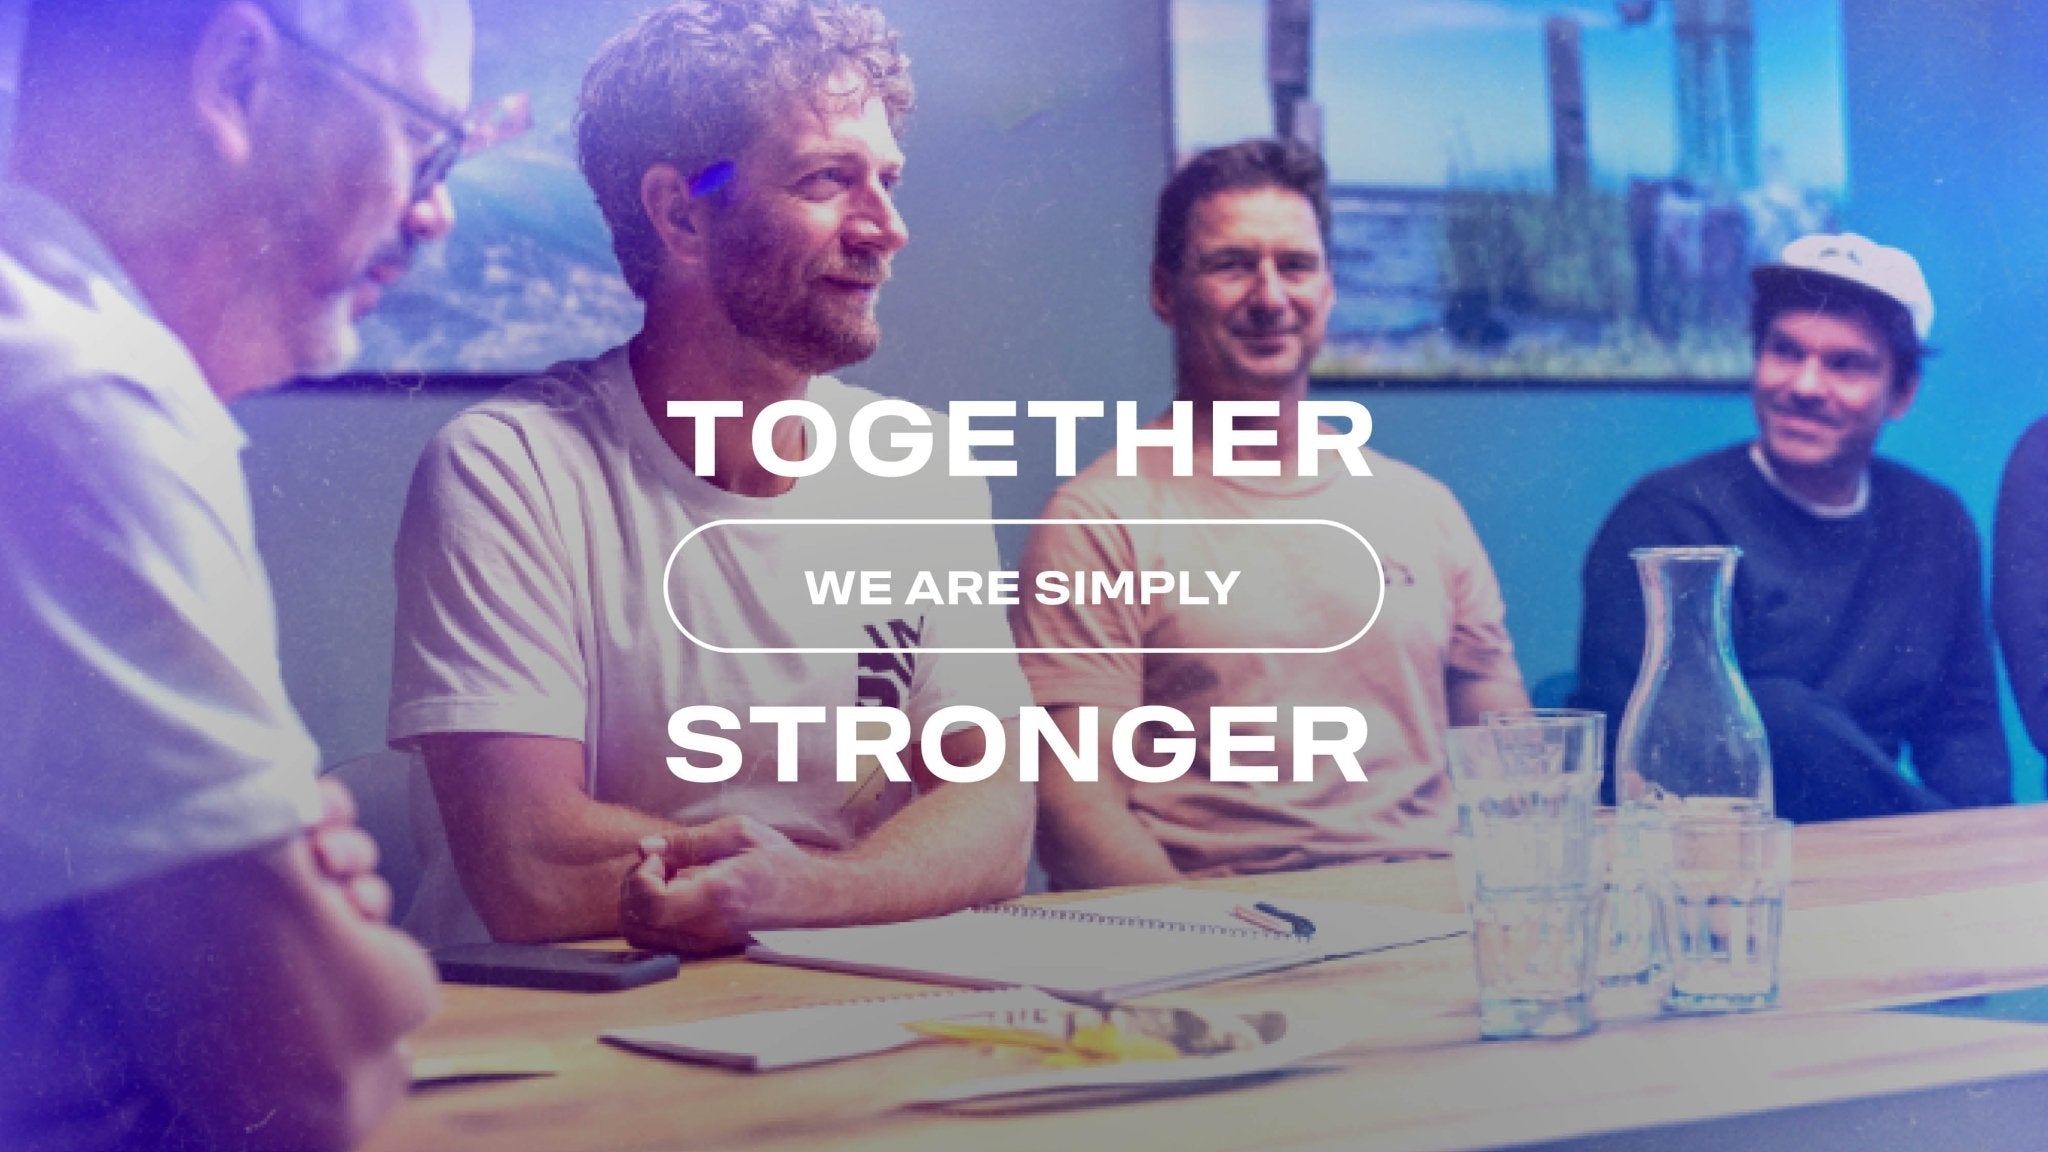 Duotone - Together, we are simply stronger - Worthing Watersports